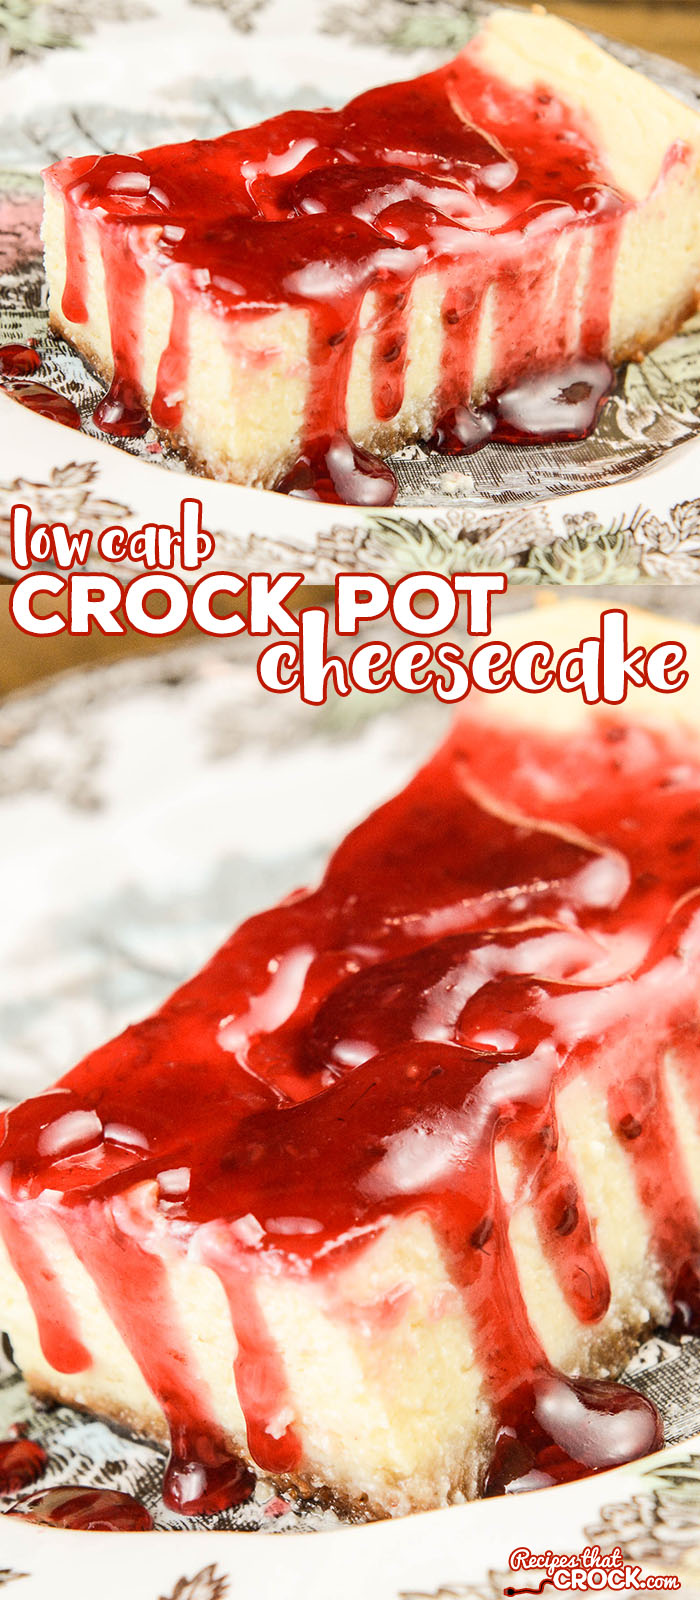 Are you looking for a delicious low carb dessert? Our Low Carb Crock Pot Cheesecake is a delicious treat for those looking for a low sugar dessert option. Slow Cooker AND Multicooker "bake" setting instructions.